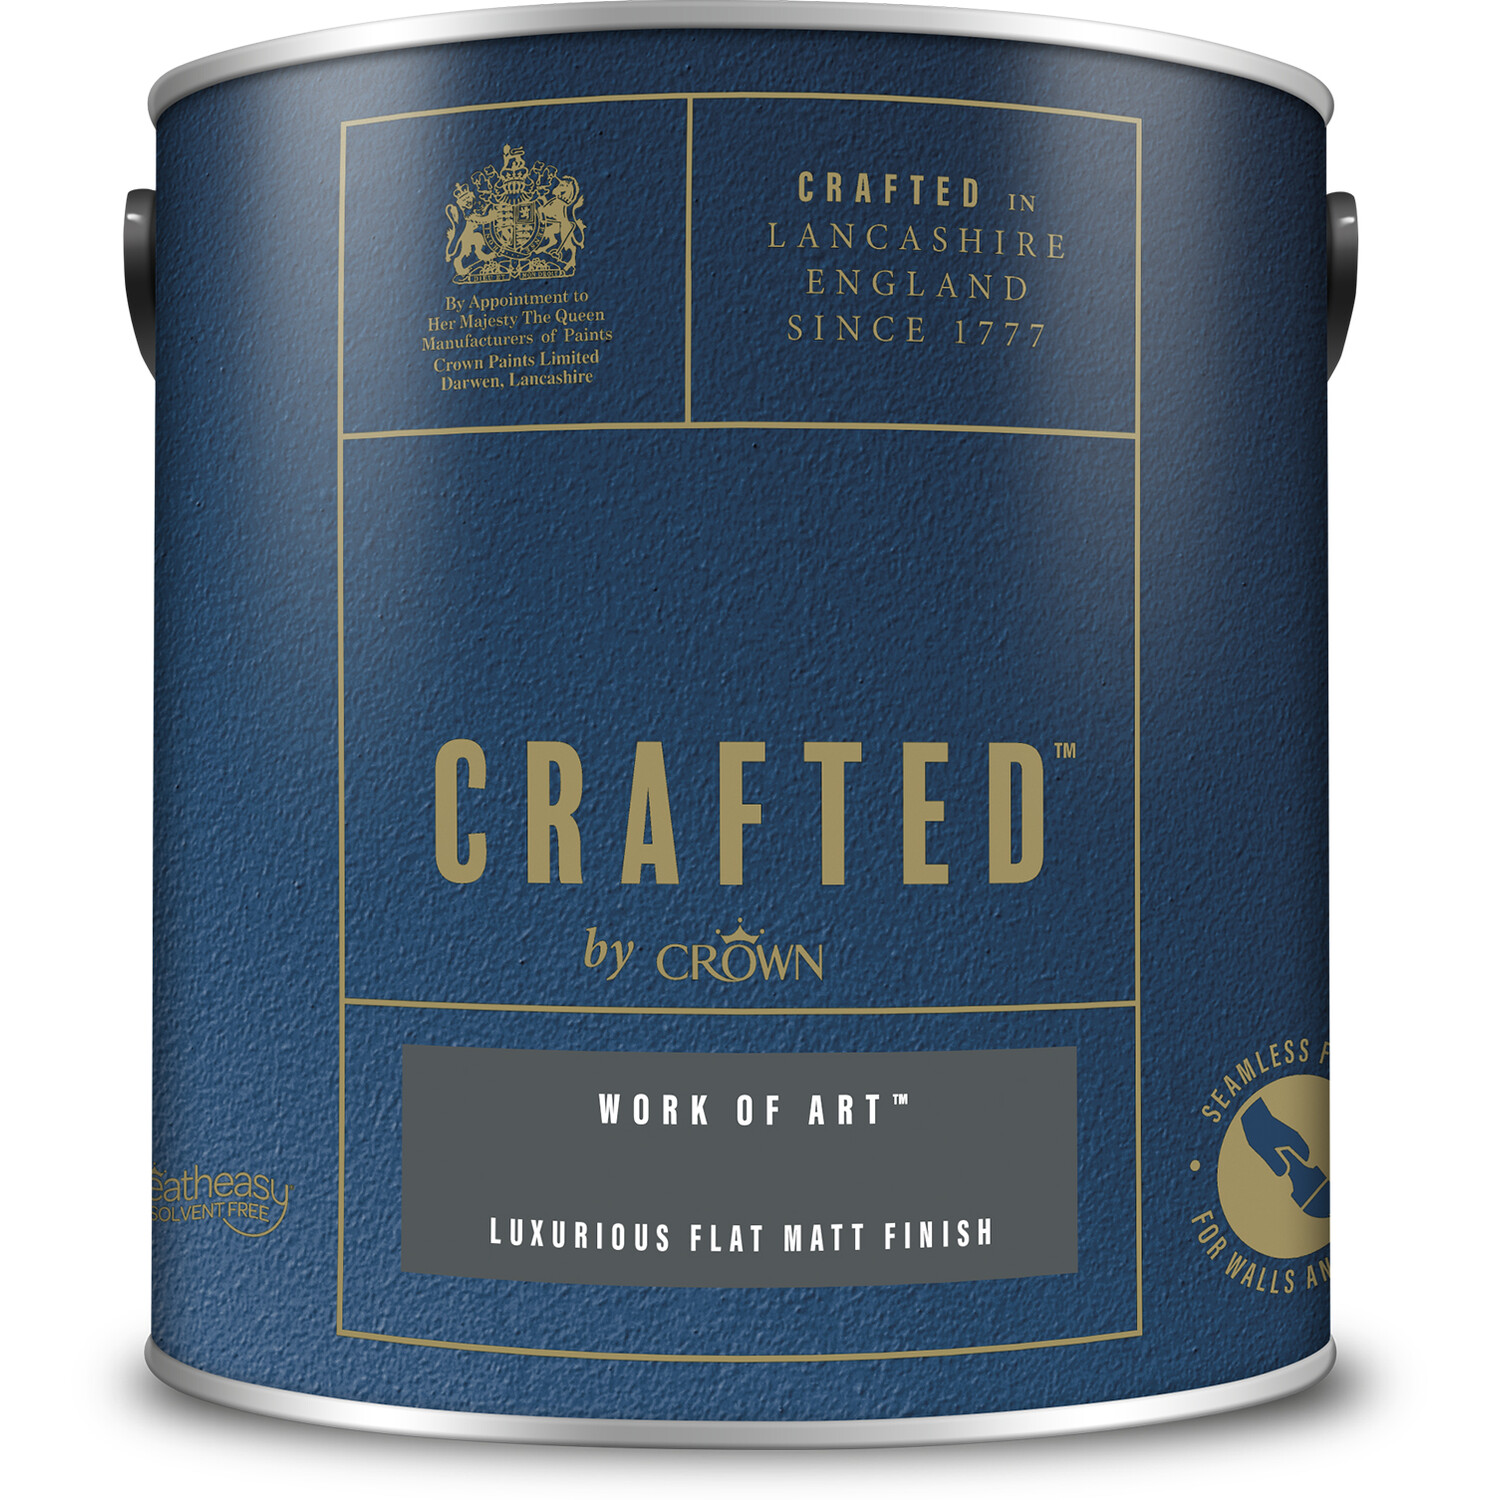 Crown Crafted Walls and Wood Work of Art Luxurious Flat Matt Paint 2.5L Image 2